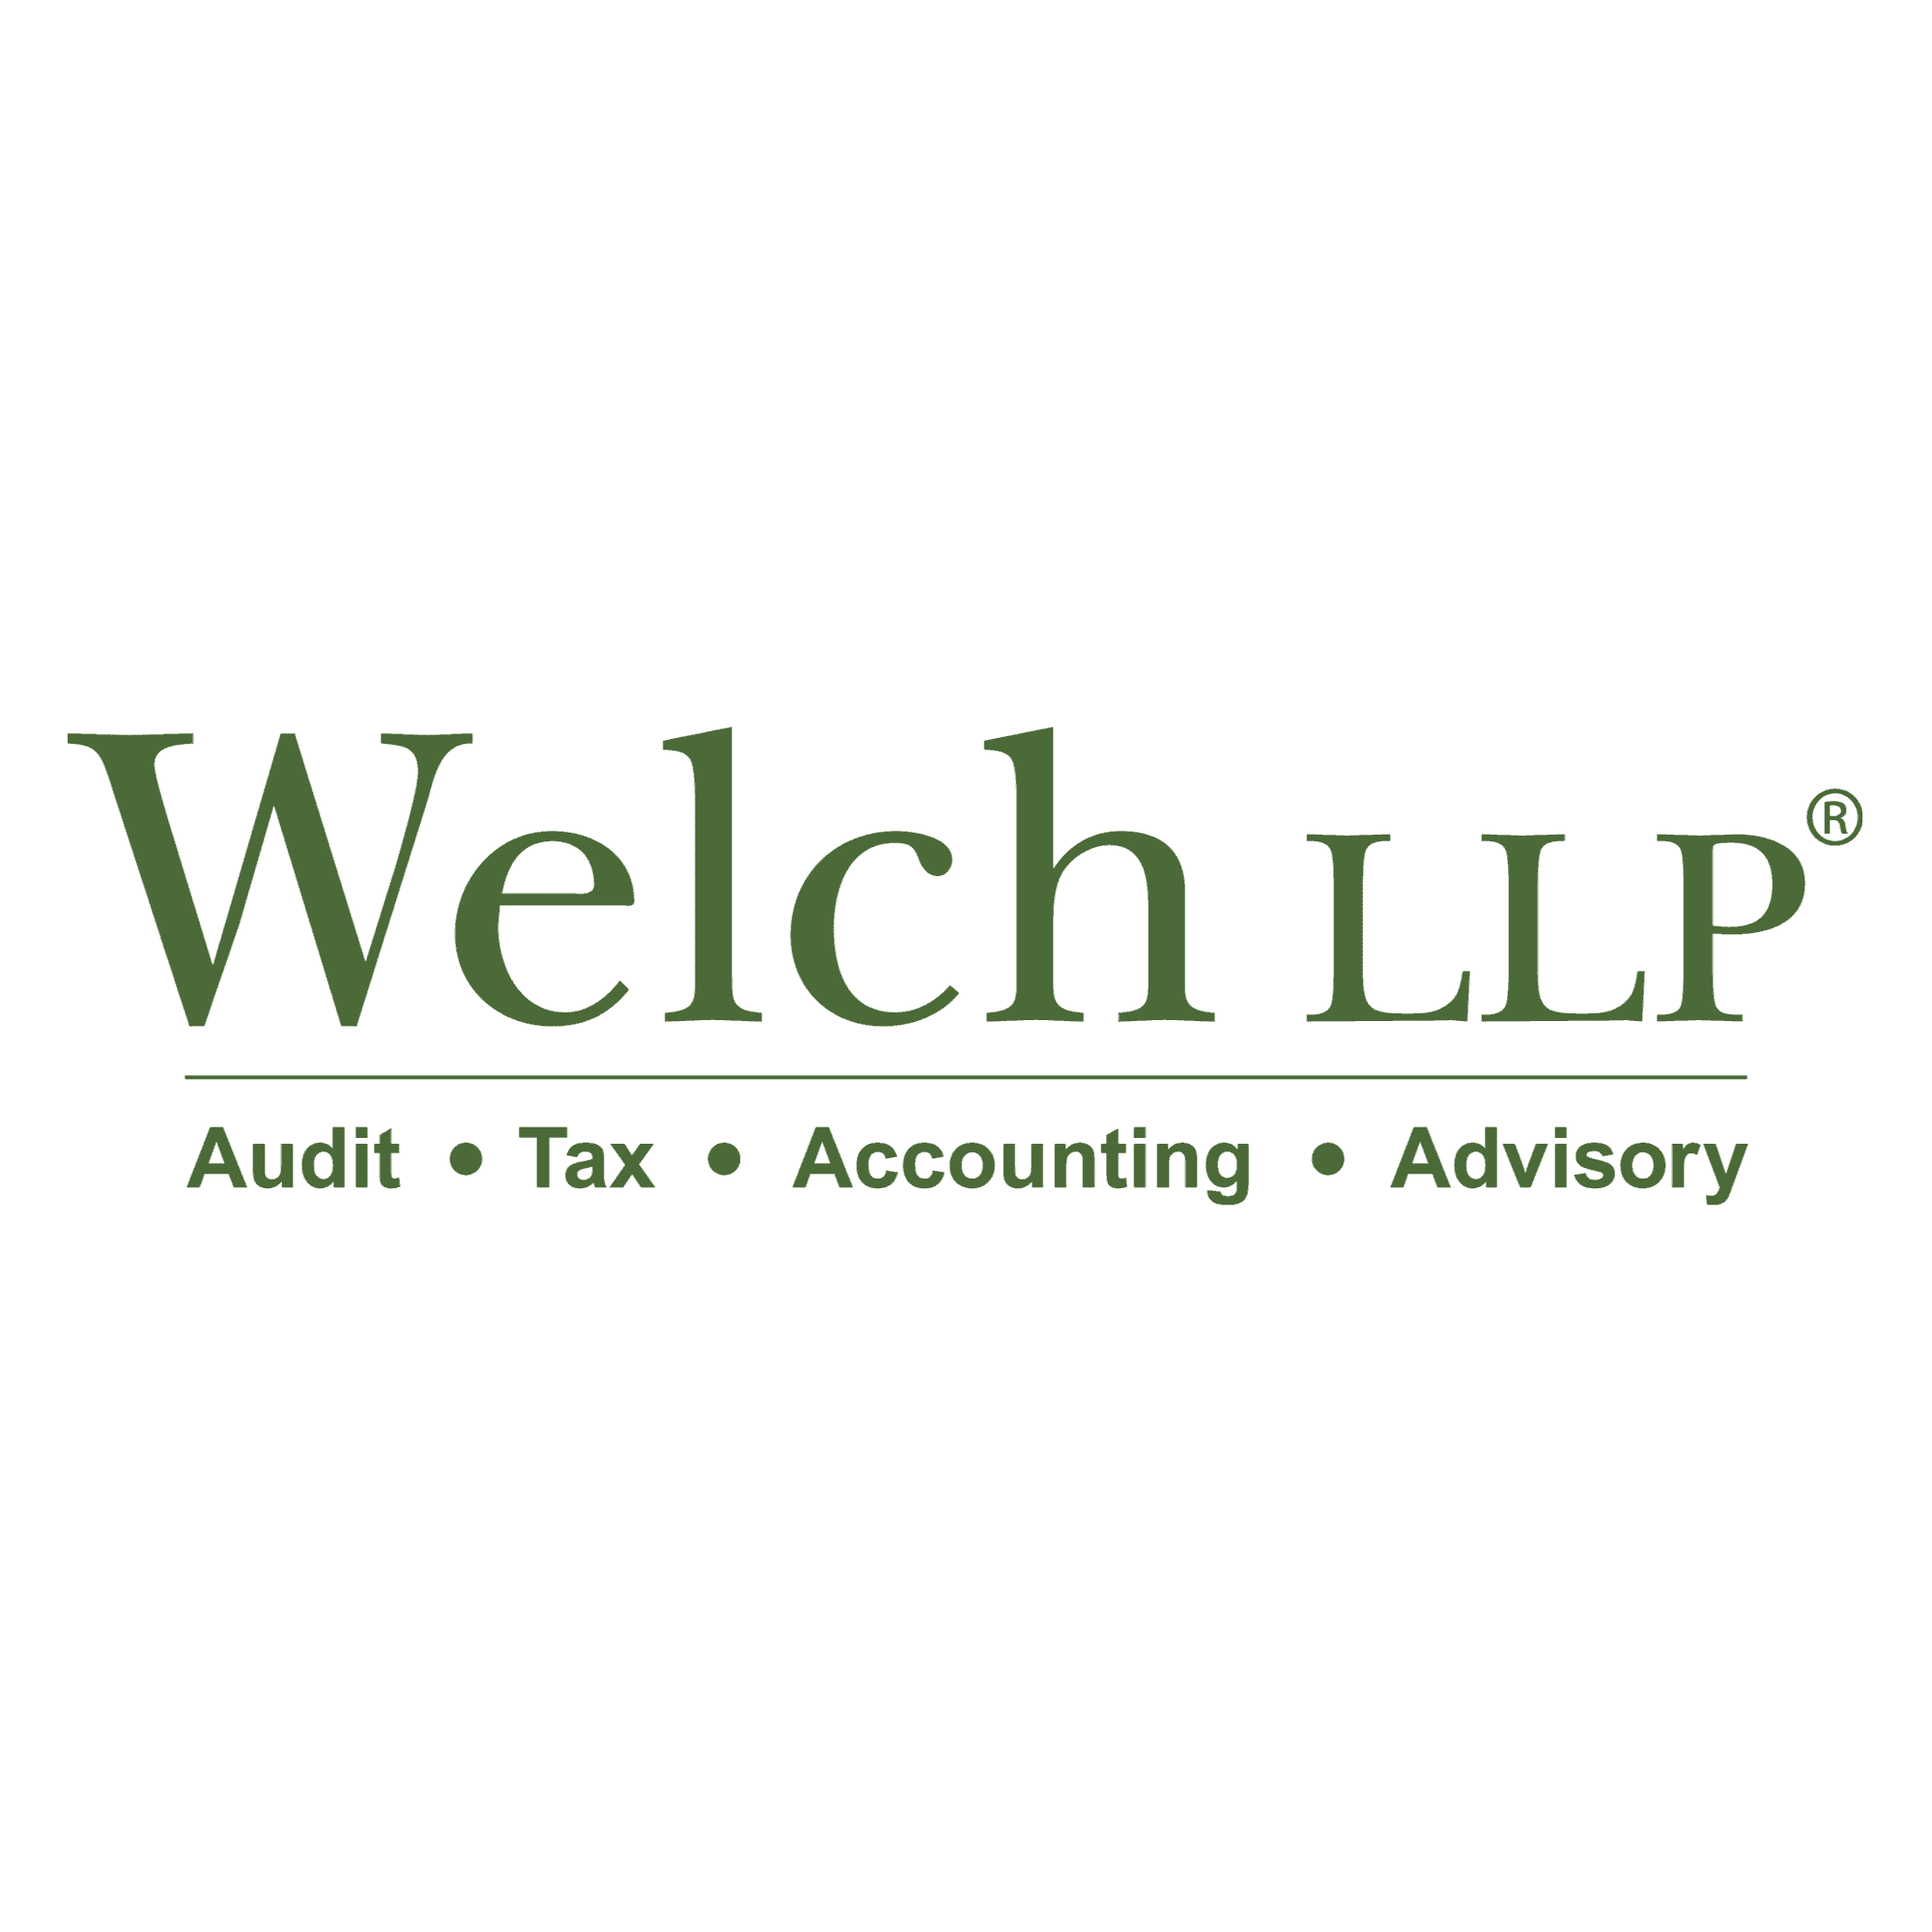 <p><a href="https://welchllp.com/" rel="noopener noreferrer" target="_blank" style="color: rgb(0, 55, 0);">Welch LLP</a></p> logo